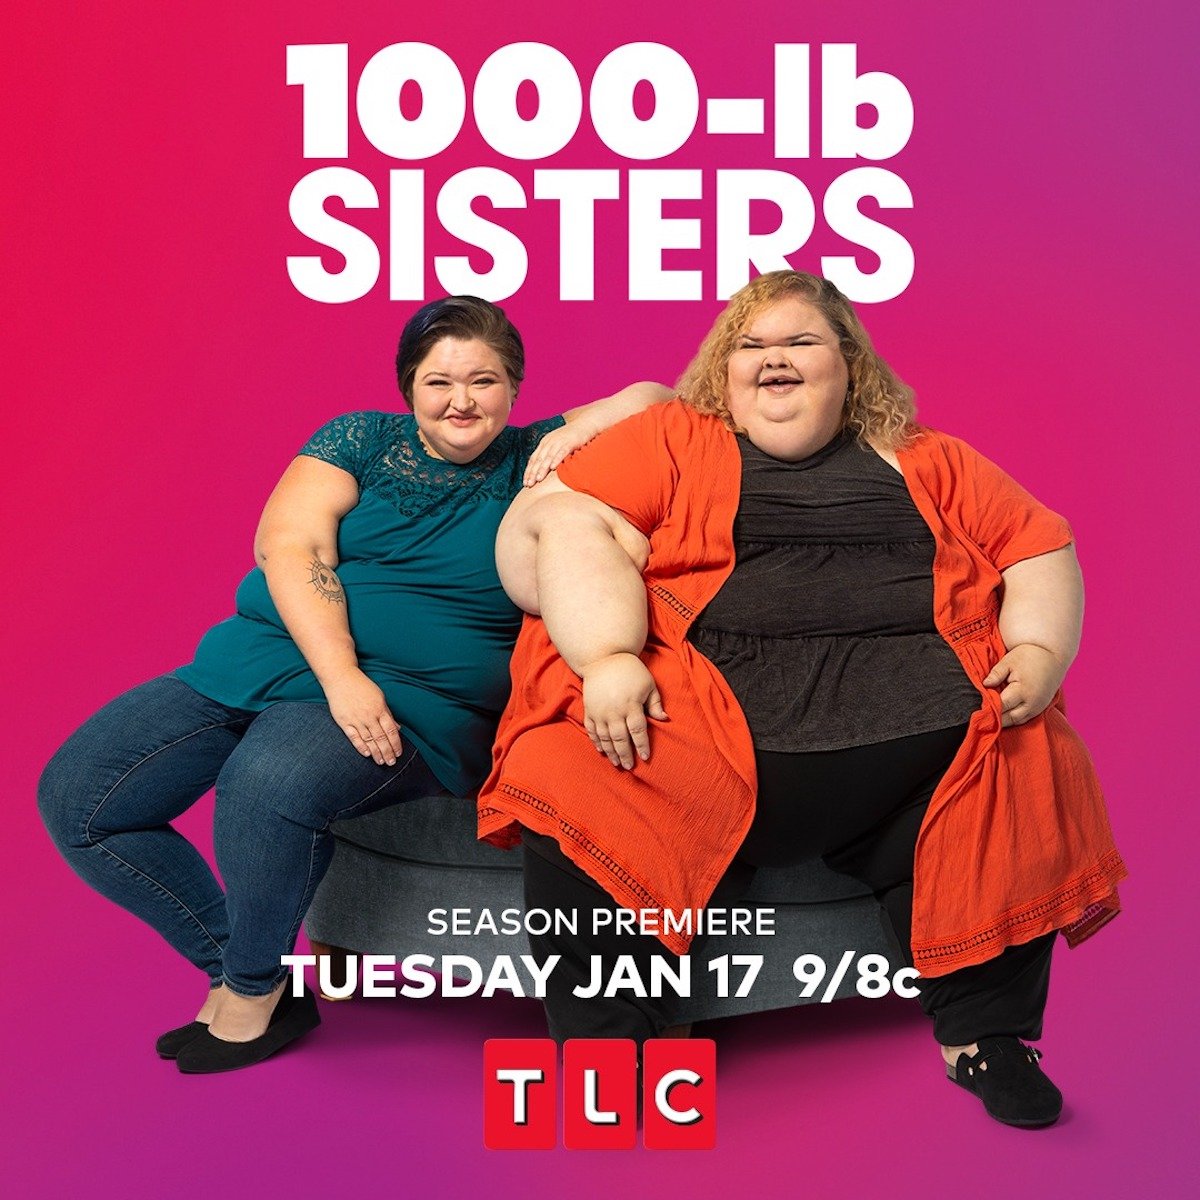 Amy and Tammy Slaton's weight has fluctuated over the four seasons of '1000-lb Sisters'